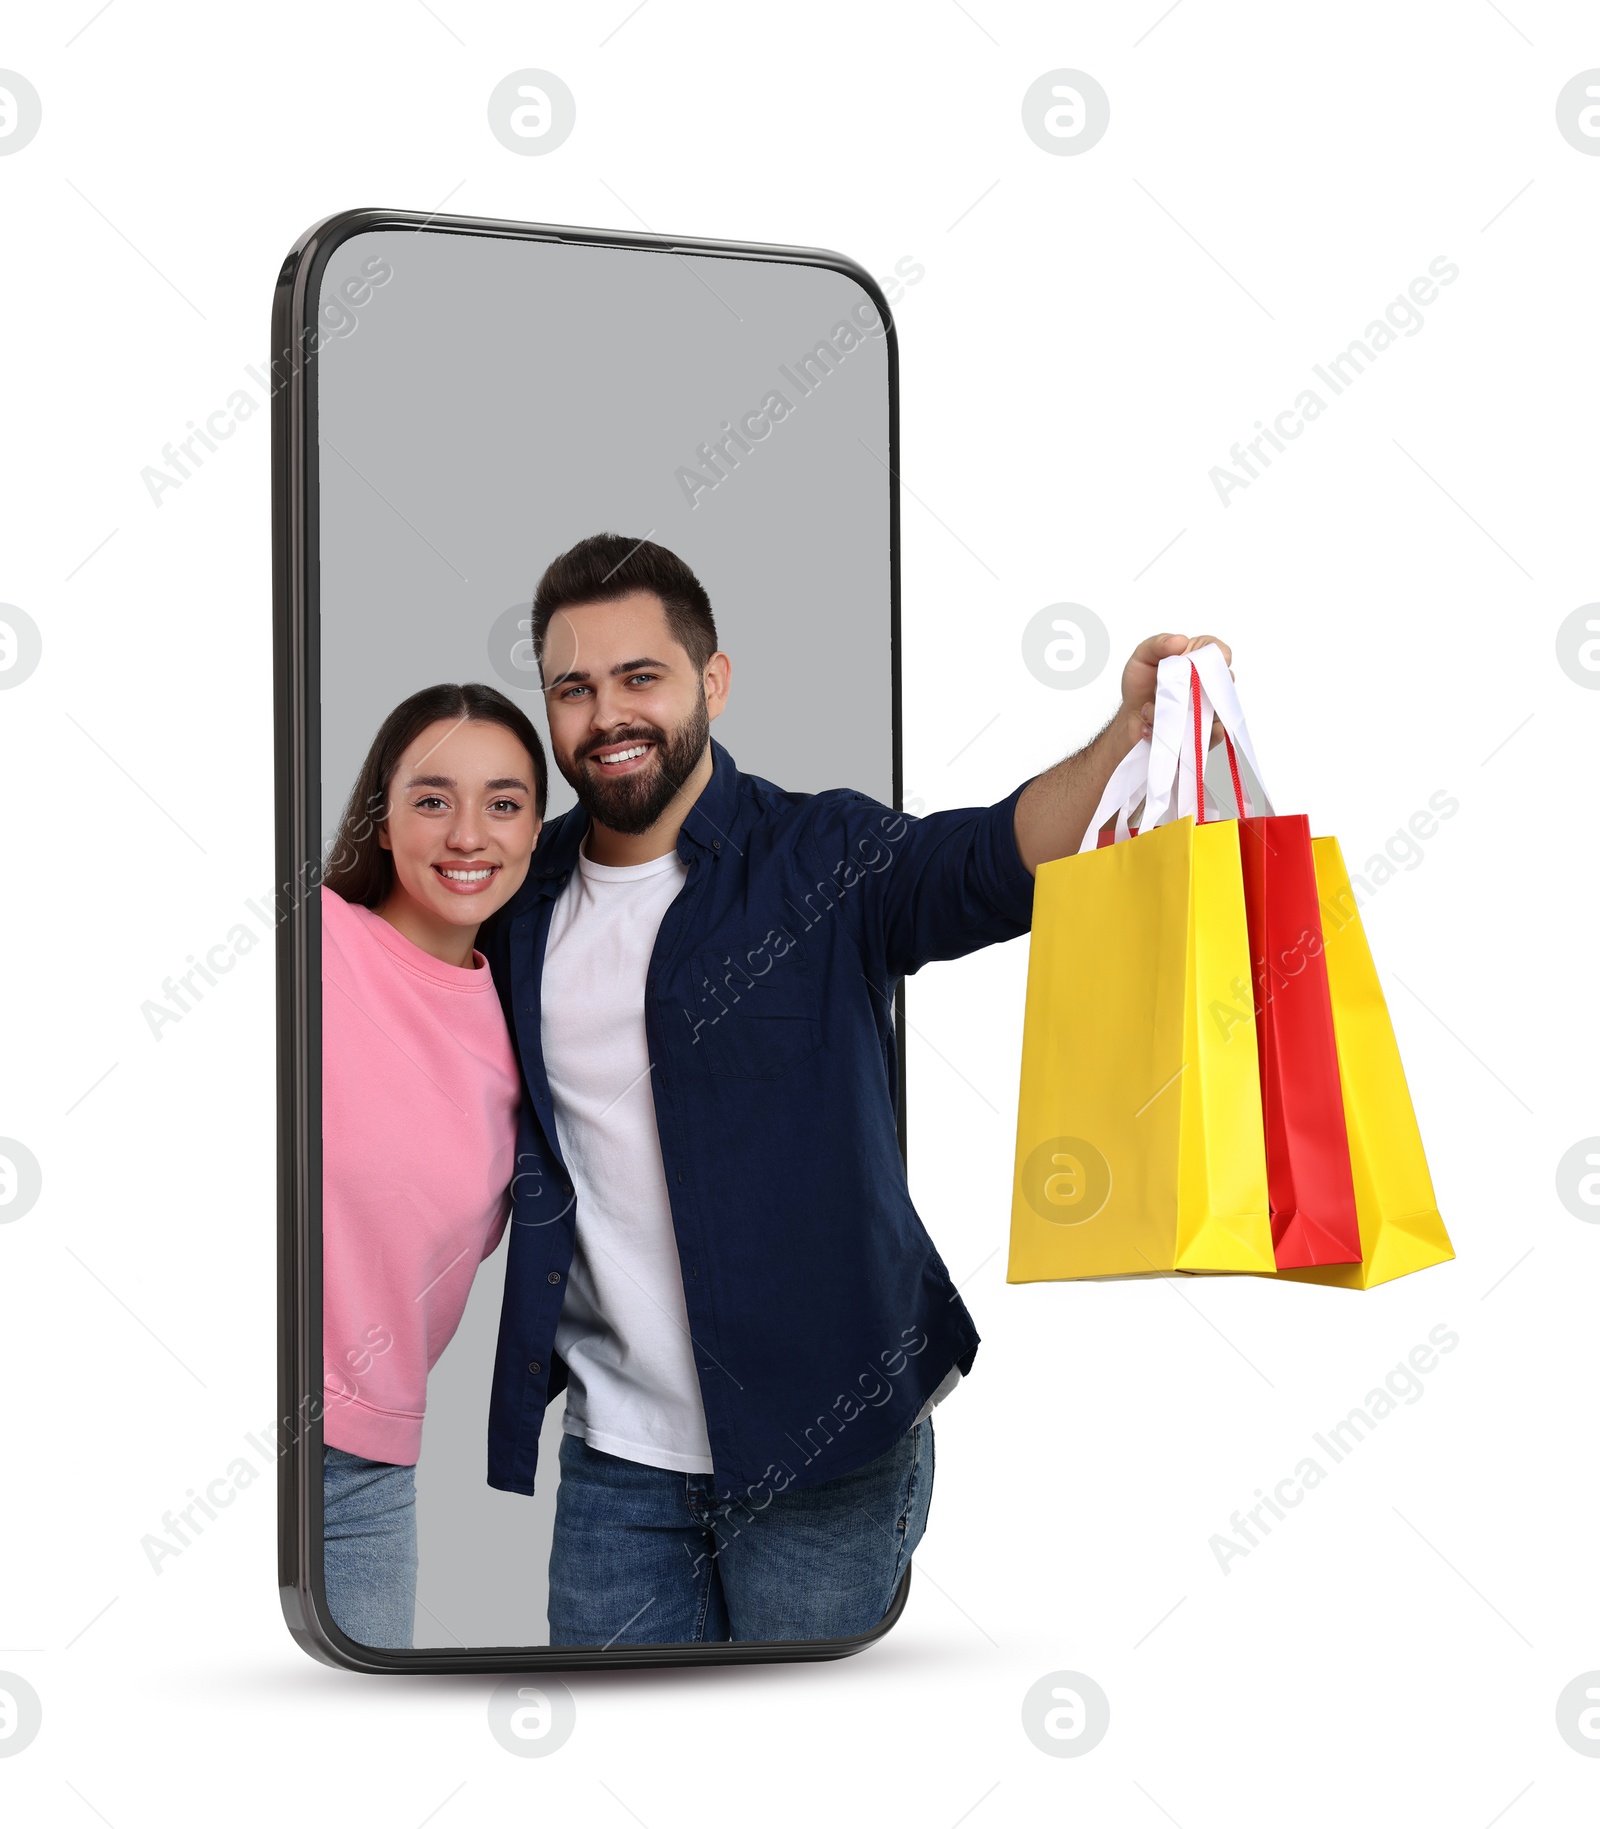 Image of Online shopping. Happy couple with paper bags looking out from smartphone on white background